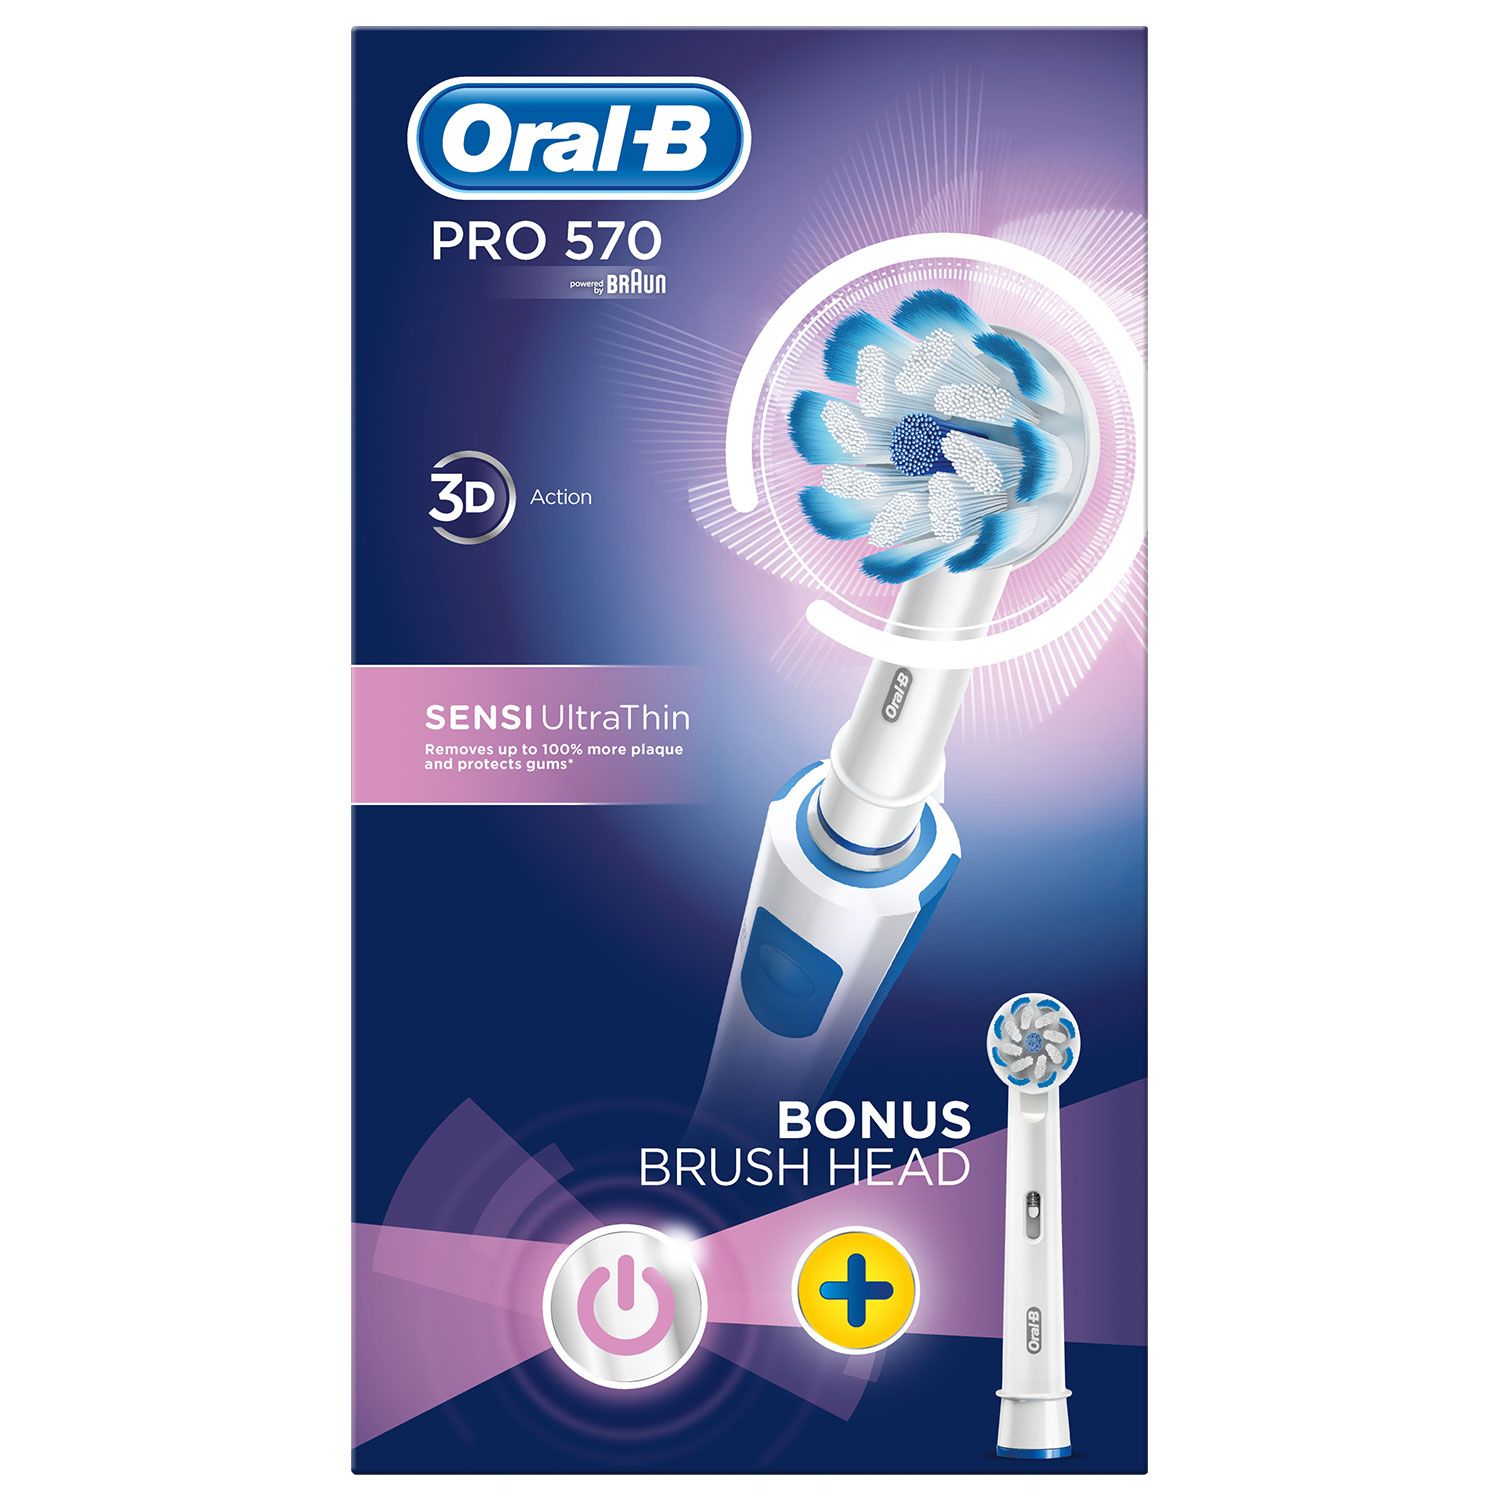 Oral B Pro 570 Sensi Ultra Thin Electric Toothbrush with Refill Head

Experience the Oral-B Sensi UltraThin toothbrush head designed by the #1 dentist recommended brand worldwide – Oral-B. The round petal shape is designed with dentists. It has soft, ultrathin bristles that are gentle on gums, combined with regular bristles that are tough on plaque. Sensi Ultrathin removes up to 100 percent more plaque and reduces gum inflammation by 100 percent compared to a manual toothbrush. The distinct combination of end rounded and ultrathin bristles make Sensi Ultrathin ideal for everyone with a sensitive mouth and everyone who is looking for just a great gentle clean.

    Removes up to 100 percent more: Plaque for healthier gums vs; a regular manual toothbrush.
    Reduces gum inflammation: By 100 percent vs a regular manual toothbrush.
    Oral-B the #1 brand: Used by Dentists & approved by the Oral Health Foundation

Experience the Oral-B Sensi Ultra-Thin

The gentlest tooth and gum care
Inspired by professional dental tools, the Sensi UltraThin toothbrush head is designed in a round petal shape with soft UltraThin bristles to give you the gentlest Oral-B brushing experience while reducing inflammation, reversing gingivitis, and improving gum health.
	
Round head cleans better
Oral-B’s round head contours to surround each tooth for cleaner teeth and healthier gums*.

Designed with dentists
Round head with a combination of ultrathin and regular bristles that are gentle on gums, but tough on plaque.

New brush head after three months
Dentists recommend replacing your toothbrush every three months, or sooner if bristles are faded and worn. Oral-B replacement toothbrush heads feature indicator bristles that fade halfway to help remind you when to replace your toothbrush head to maintain a superior clean.

Brush heads designed with dentists
Oral-B brush refills are designed to perfectly fit your toothbrush and come with specialised features for great results. These features include end rounding to be gentle on gums, angled bristles to clean in-between teeth, and UltraThin bristles for extra gentle cleaning.
	
Number one dentist recommended
Oral-B is not only designed with dentists; it’s also the number one toothbrush brand recommended by dentists worldwide. Discover for yourself the next level of oral care by Oral-B.


Direction : Dentists recommend replacing your toothbrush head about every 3-4 months, or when bristles are faded and worn. Oral-B offers a variety of toothbrush heads to fit your personal oral health needs.